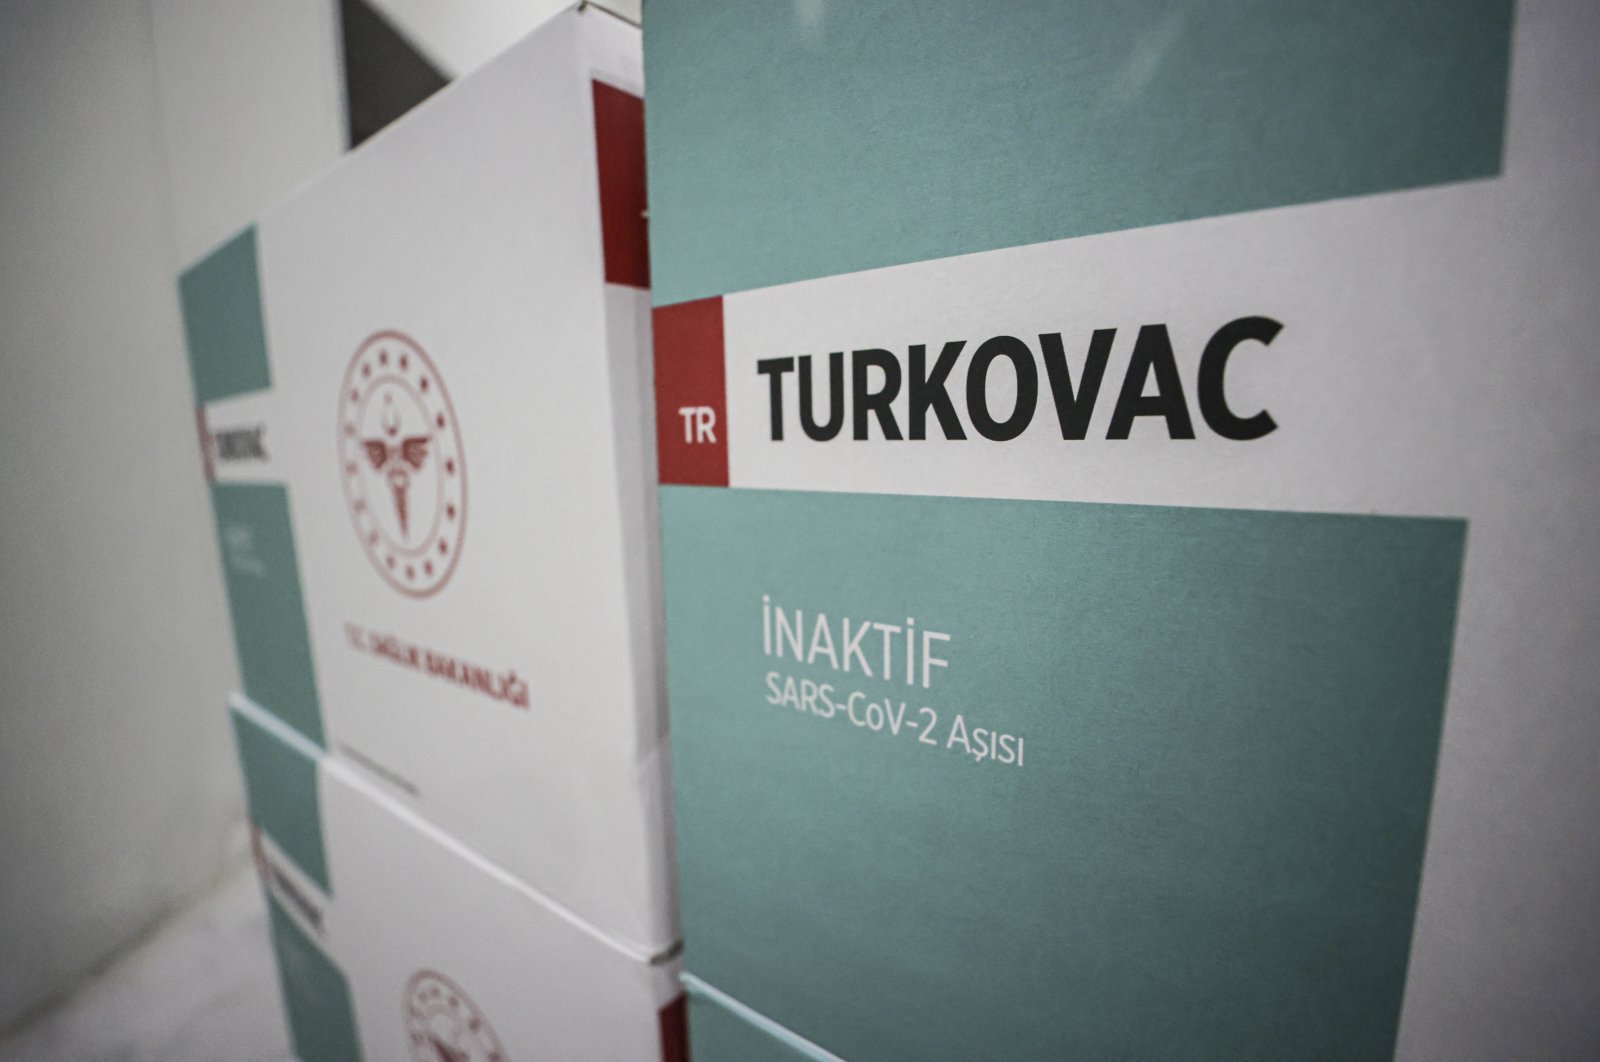 Boxes containing Turkovac vaccines are seen in a Health Ministry depot in Ankara, Turkey, Dec. 24, 2021 (AA Photo)